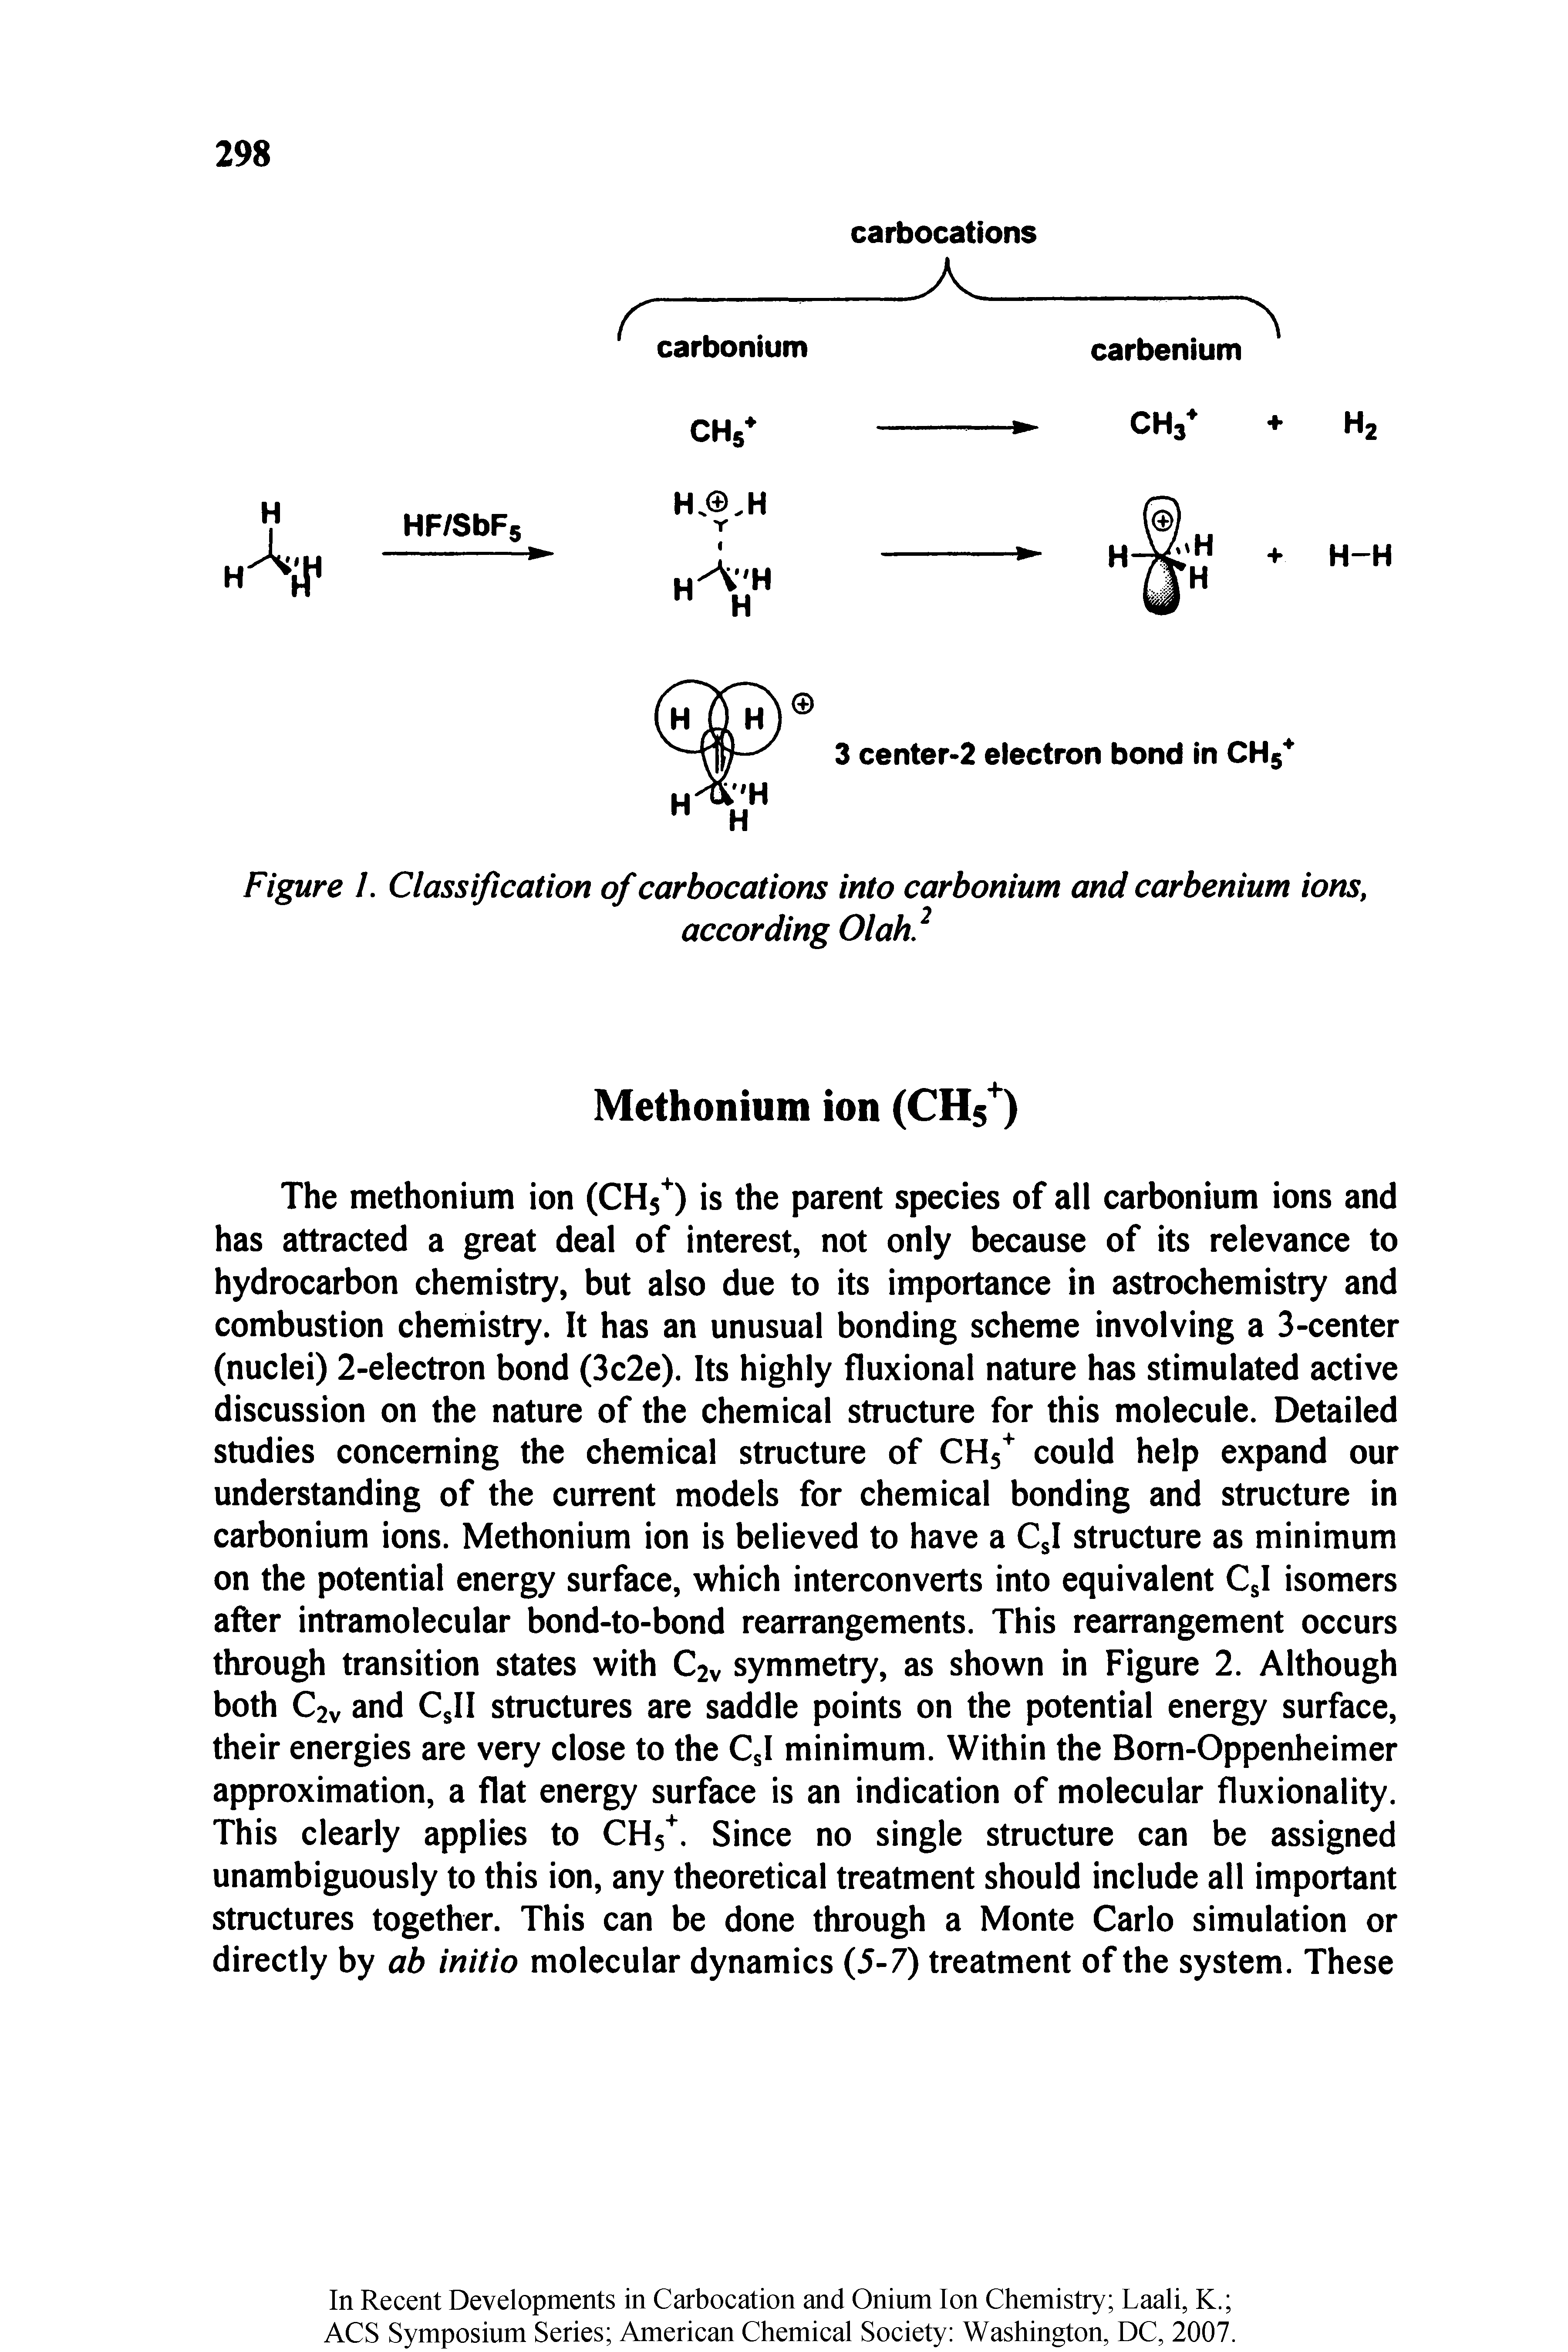 Figure 1. Classification of carbocations into carbonium and carbenium ions,...